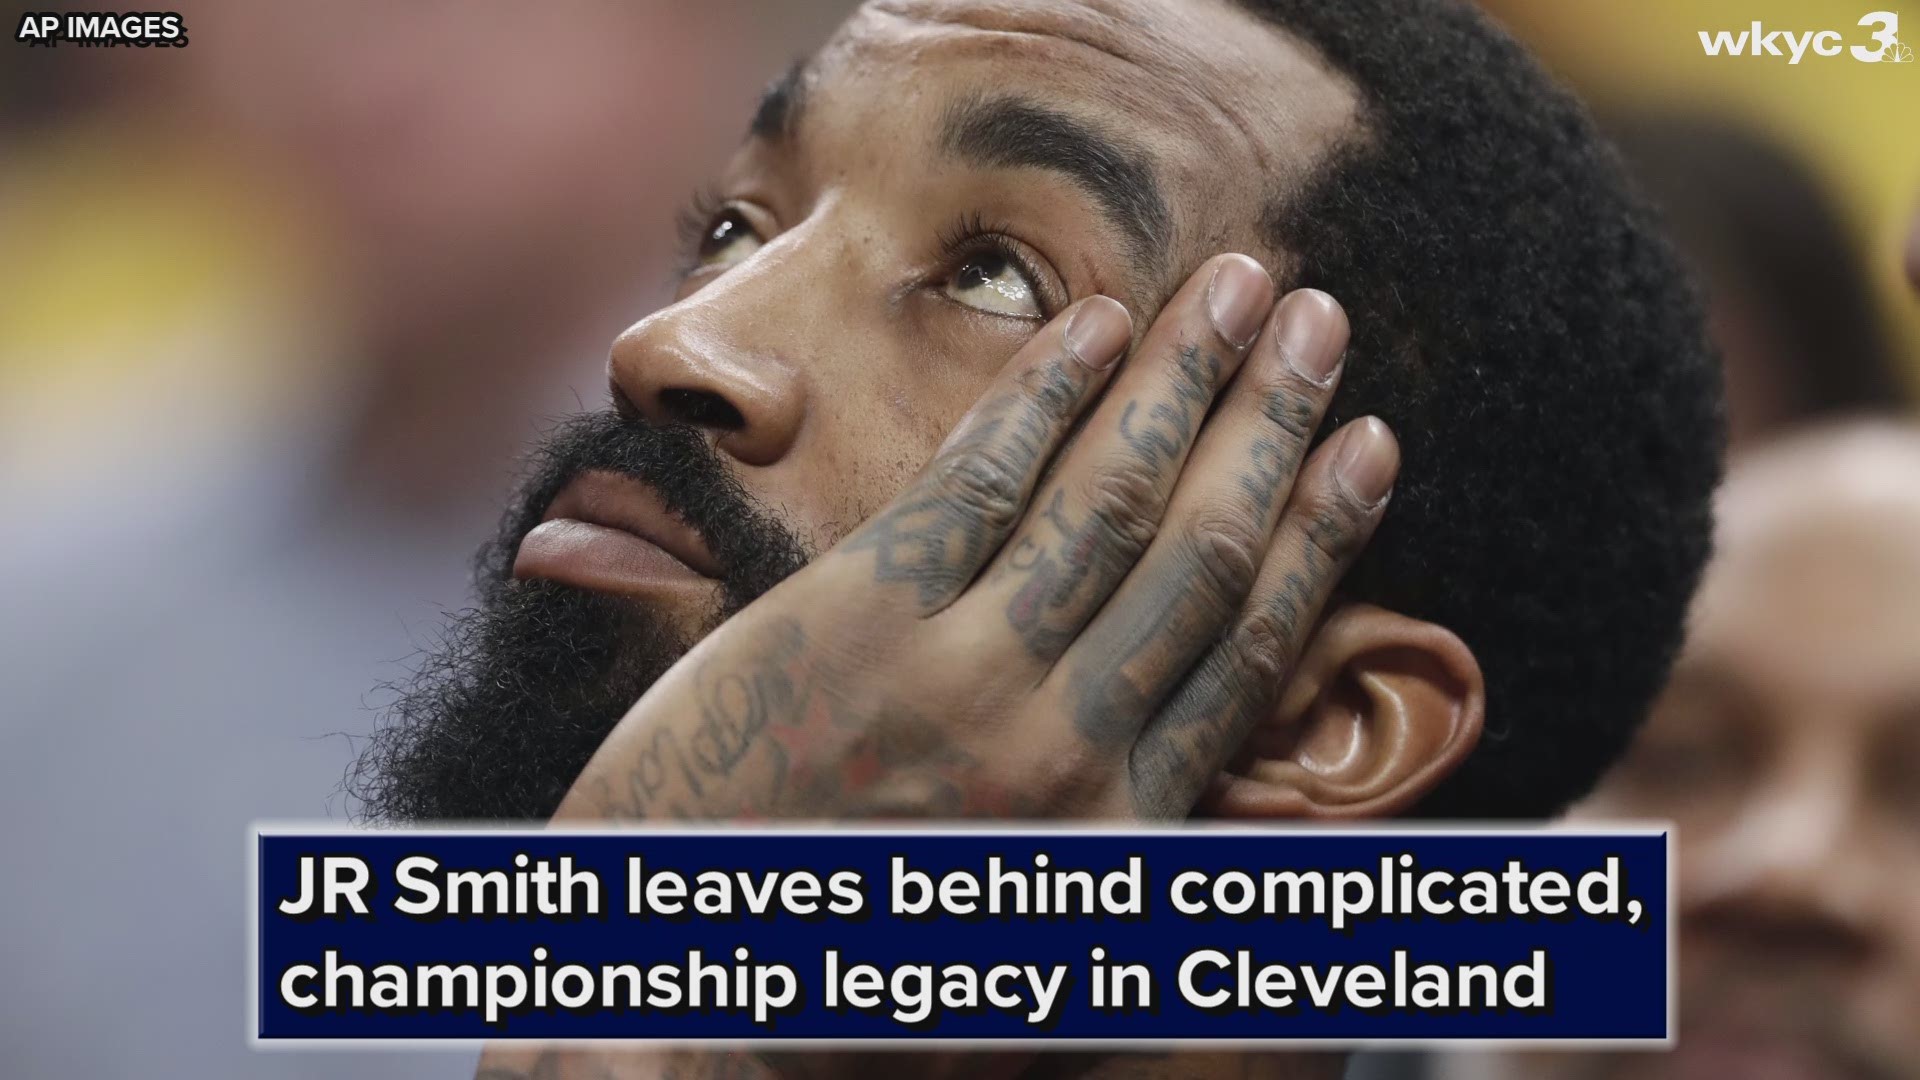 On Monday, the Cavaliers are expected to waive J.R. Smith, bringing an end to his time in Cleveland.